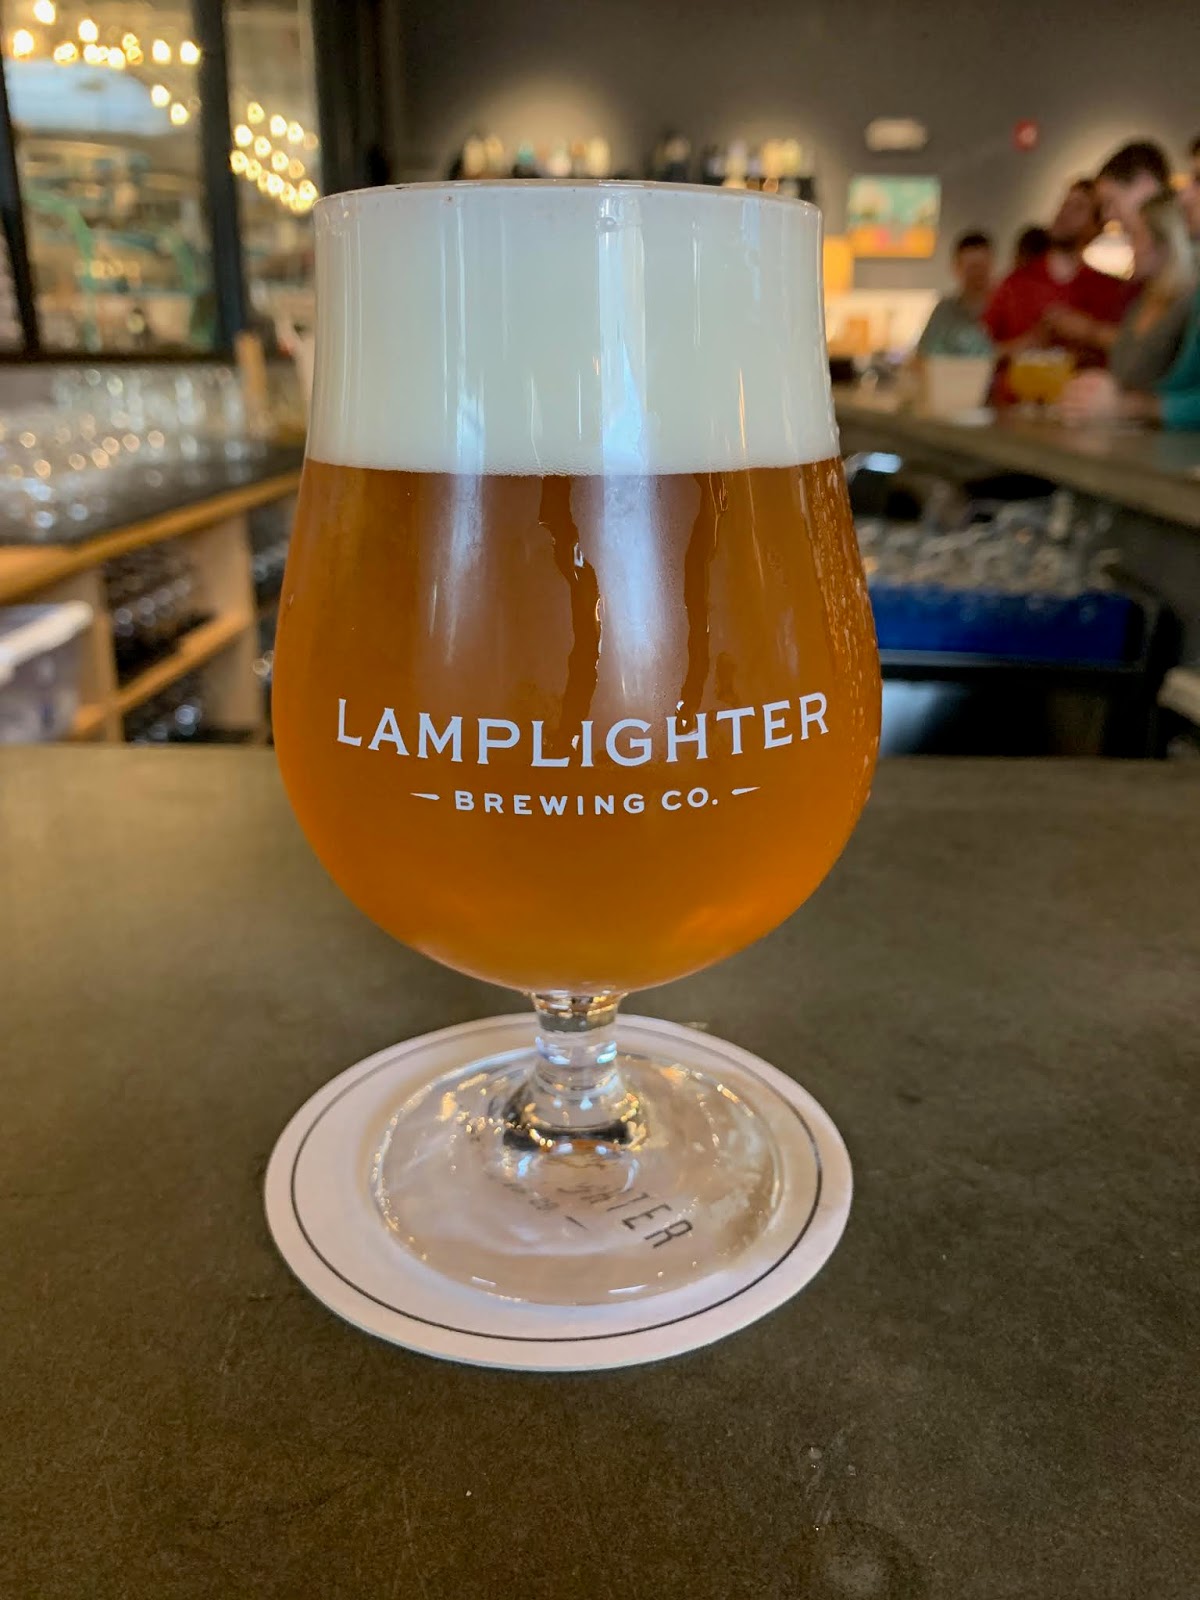 LAMPLIGHTER BREWING COMPANY Cambridge STICKER decal craft beer brewery 